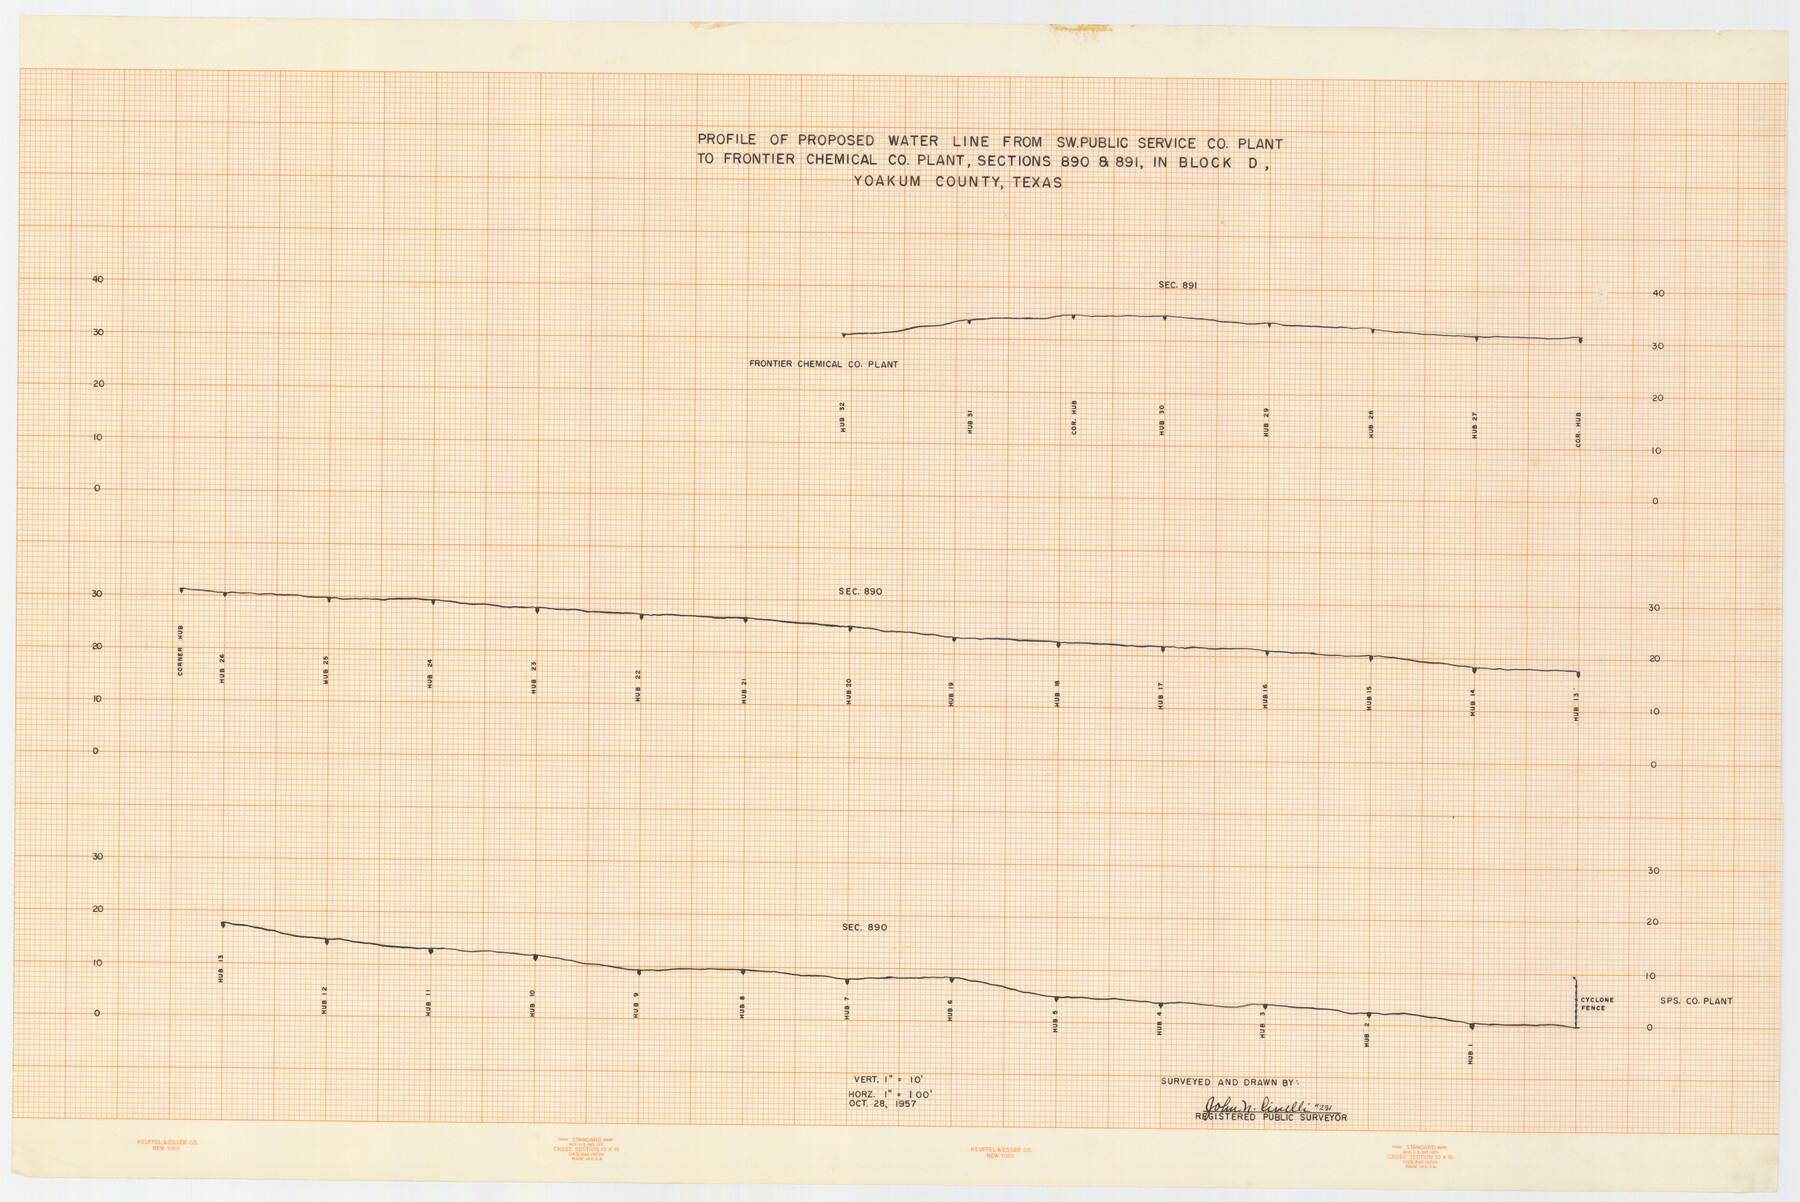 92444, Profile of Proposed Water Line From SW. Public Service Co. Plant to Frontier Chemical Co. Plant, Sections 890 & 891, in Block D, Twichell Survey Records